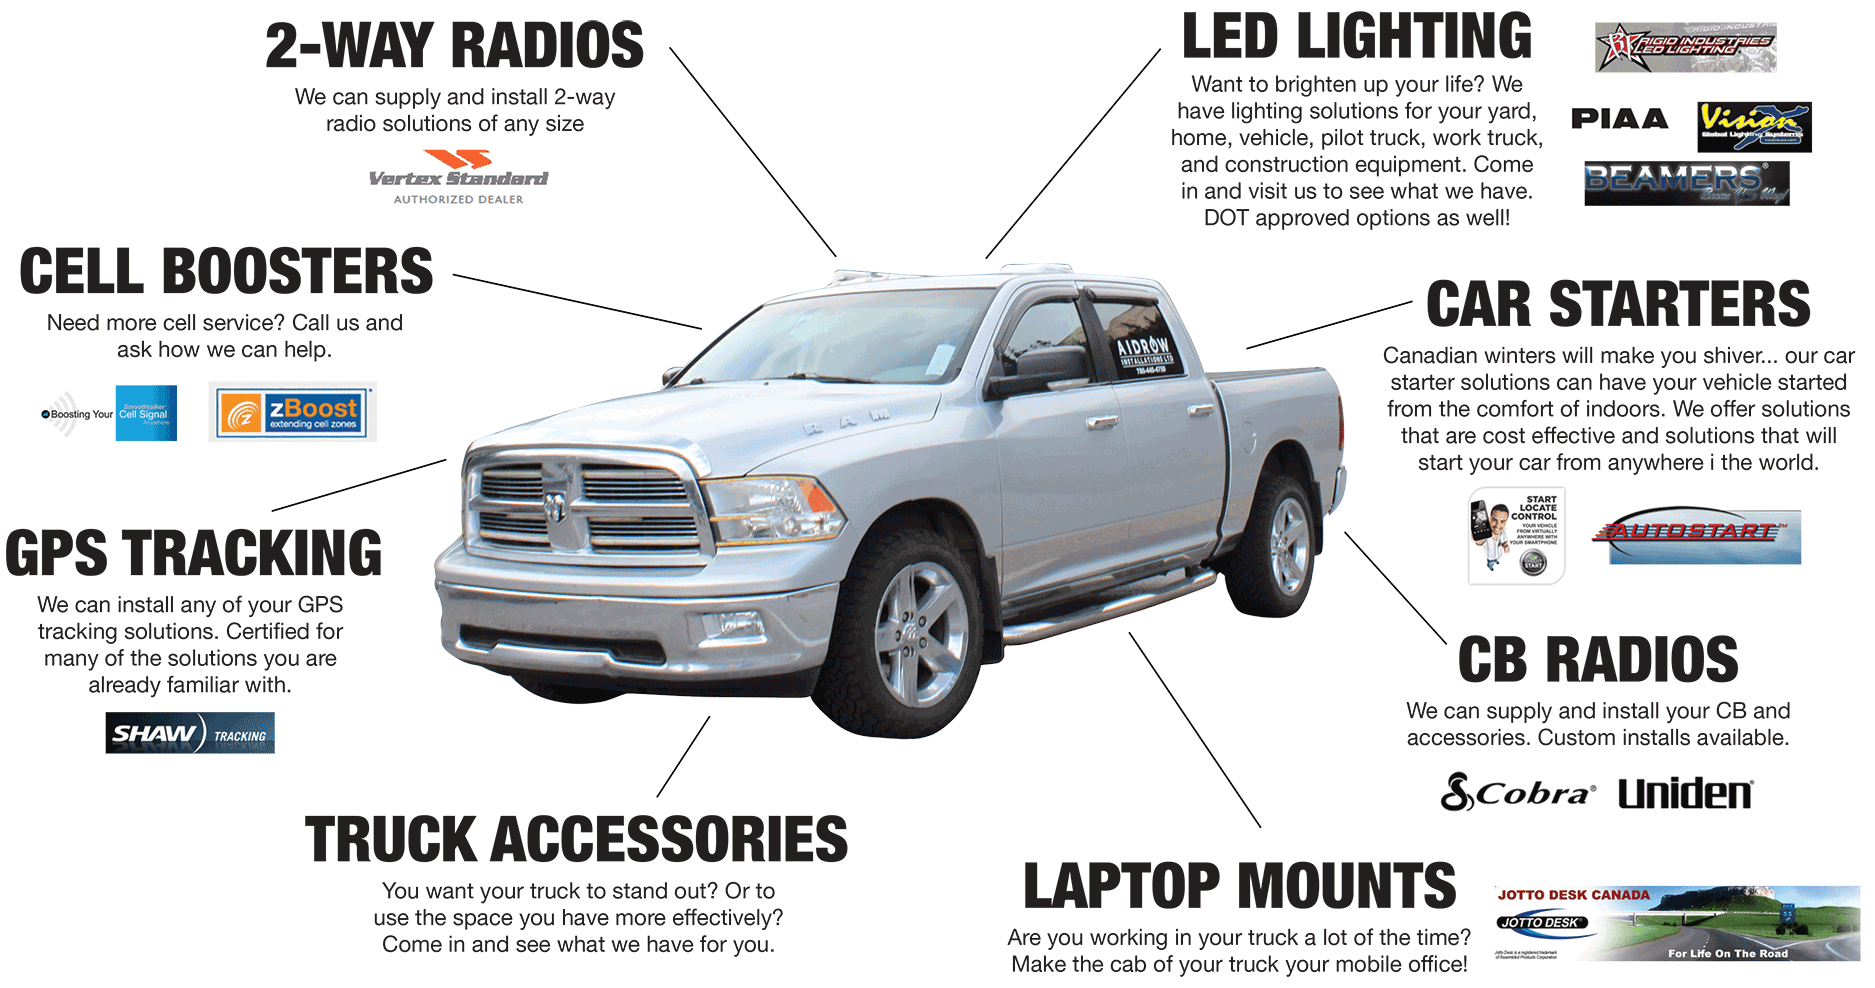 Aidrow Installations Ltd. product listing diagram; 2-way radios, cell boosters, GPS tracking, Truck accessories, laptop mounts, CB radios, car starters, and LED lighting.